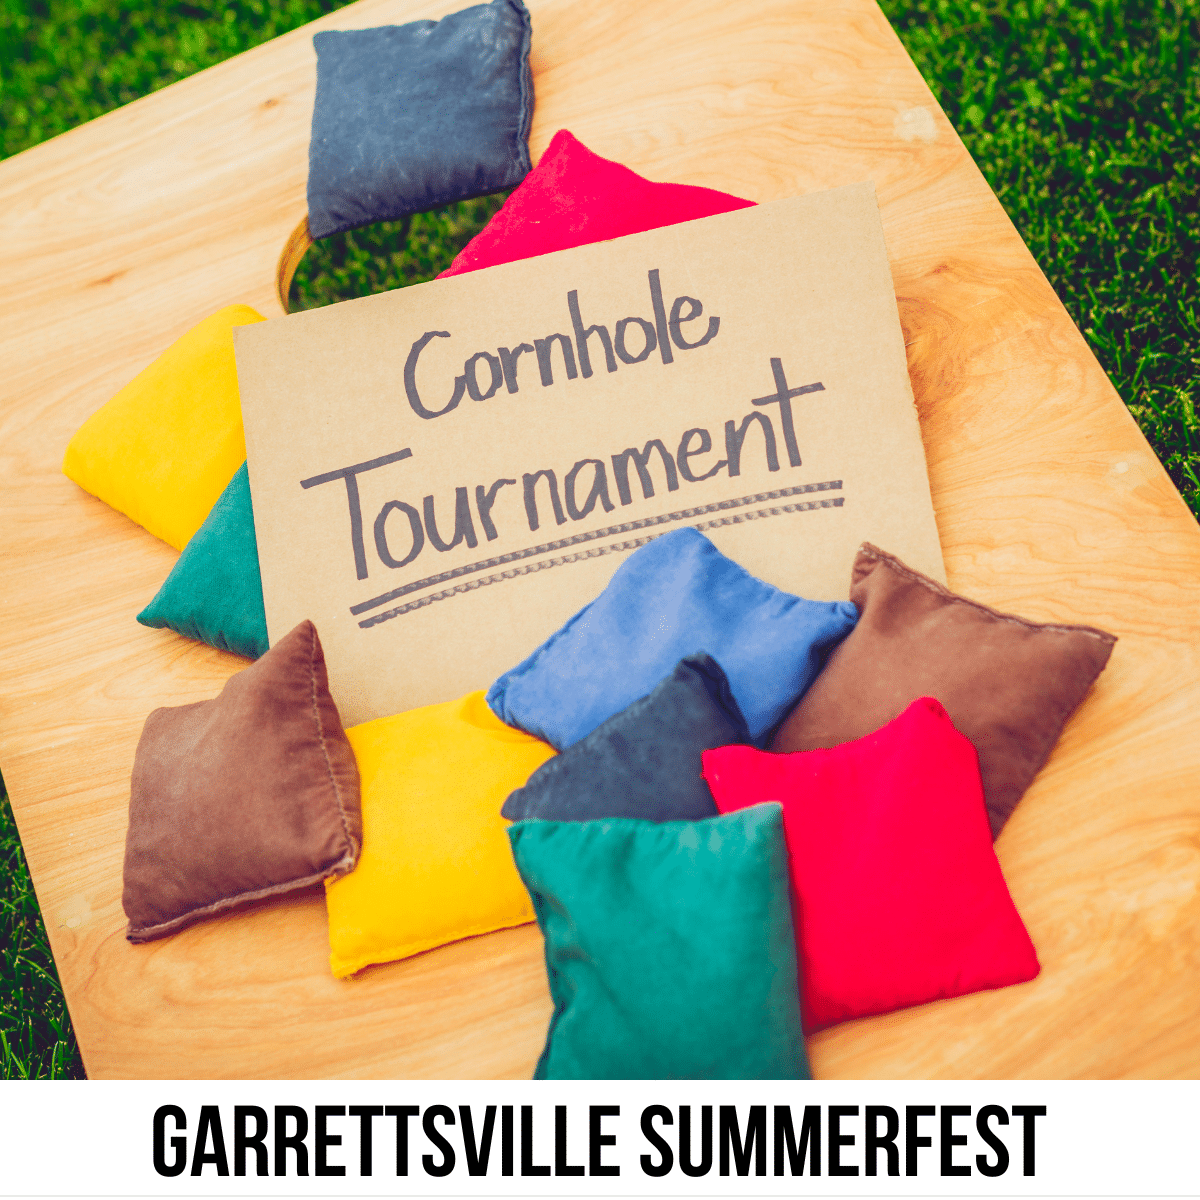 A square image of a photo of a cornhole game with bean bags and a sign that says Cornhole Tournament. A white strip across the bottom has text Garrettsville Summerfest.